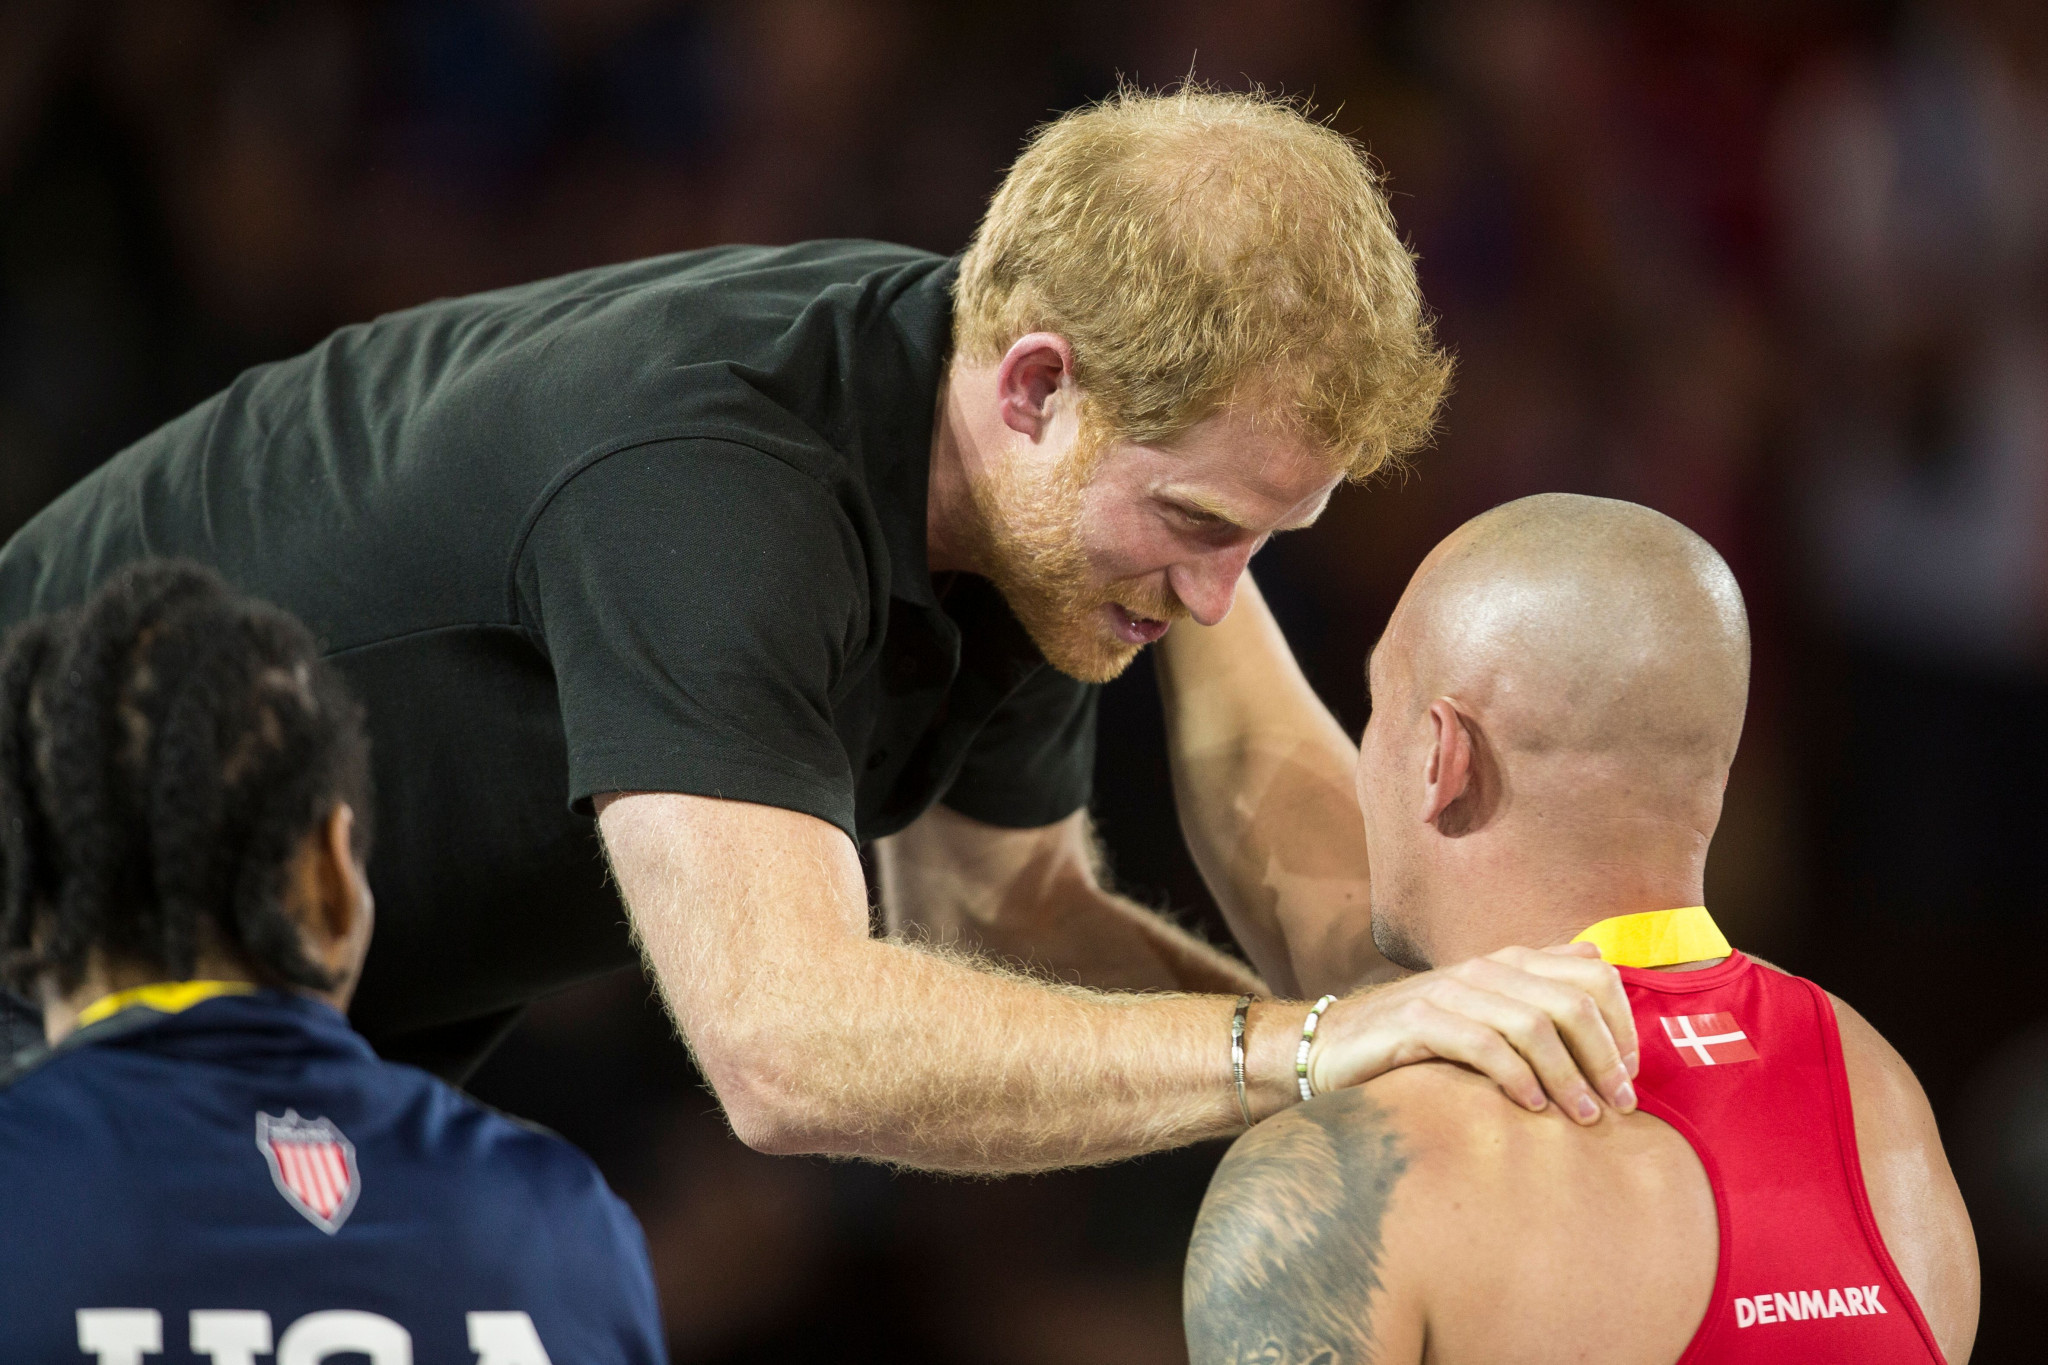 Prince Harry presented the medals after Denmark beat Great Britain 23-18 in the final ©Getty Images